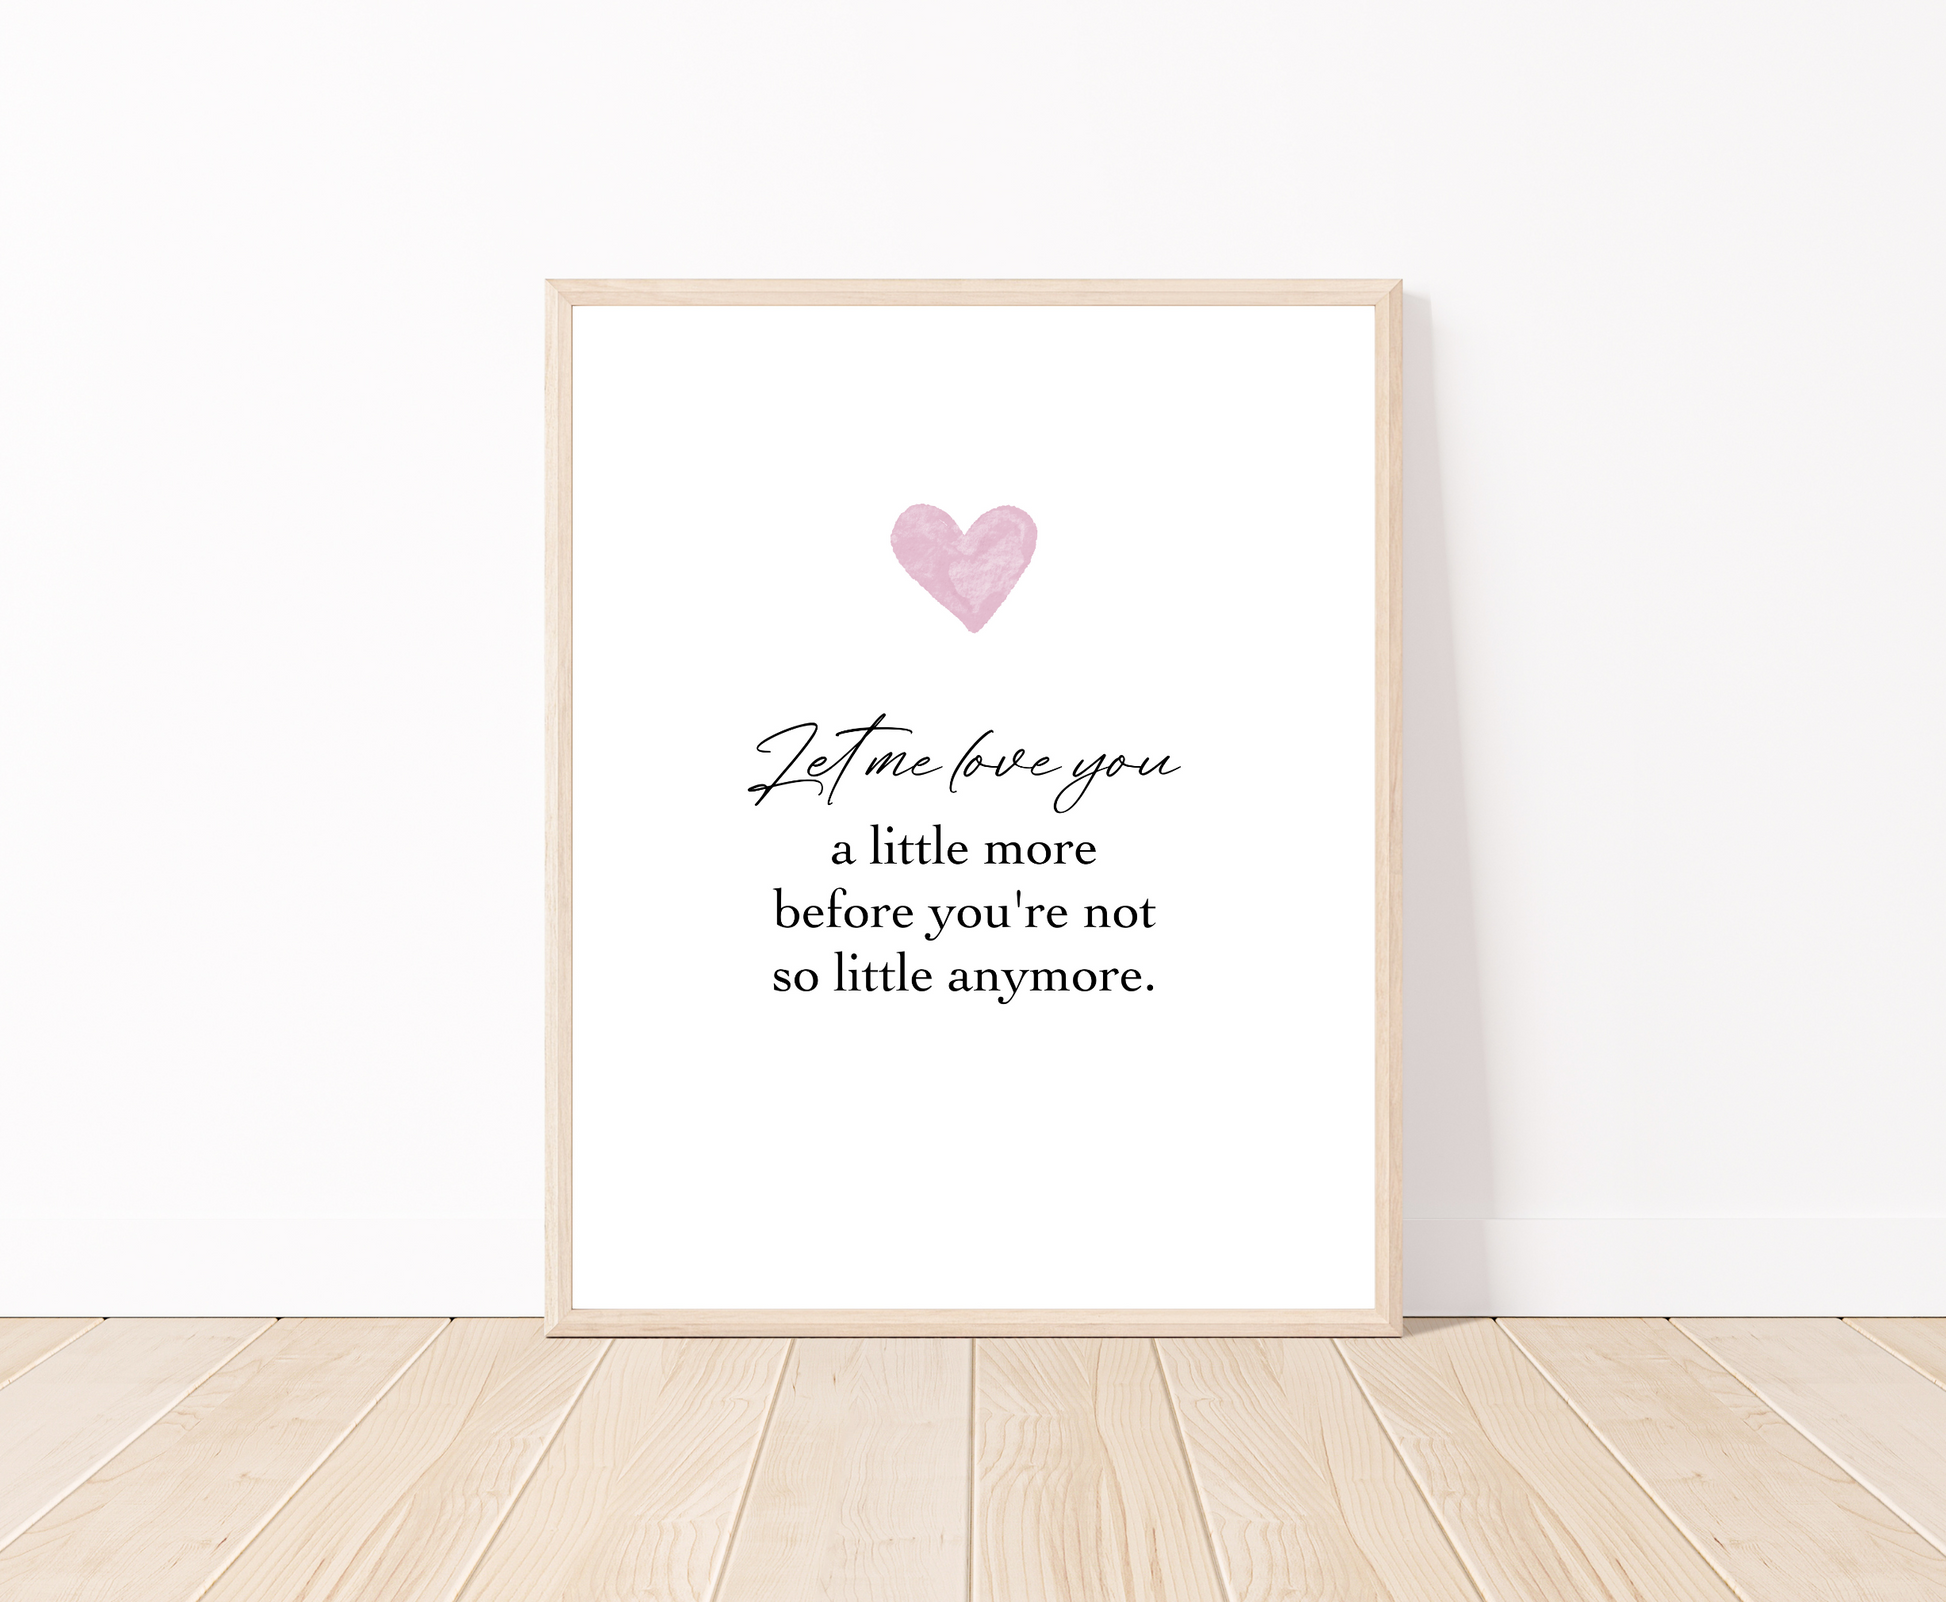 A digital poster is placed on a white wall and parquet flooring and has a pink heart at the top with a piece of writing that says: “Let me love you, a little more before you’re not so little anymore.”